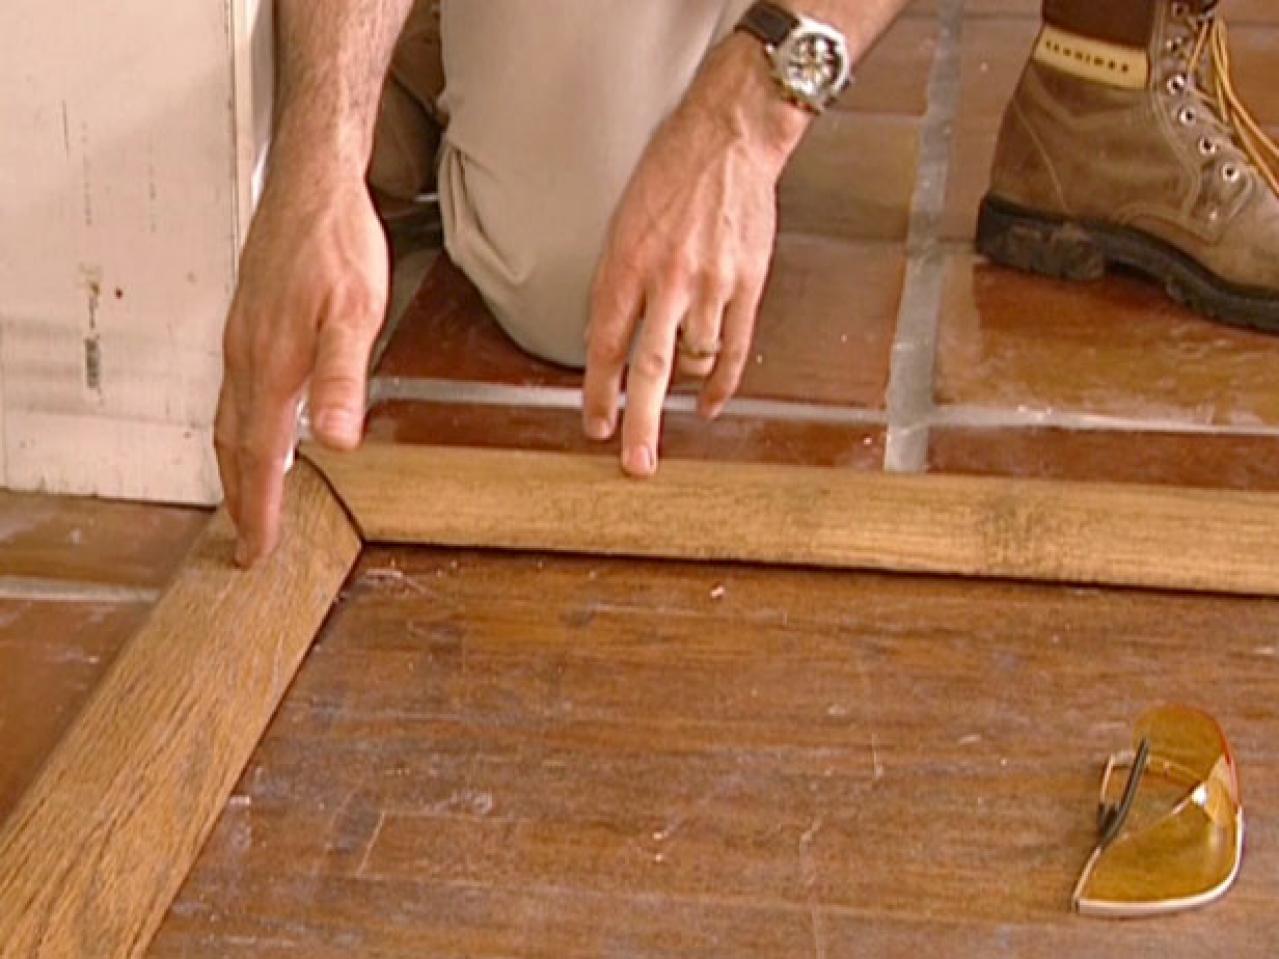 How To Install A Tile Floor Transition, Removing Tile From Hardwood Floor